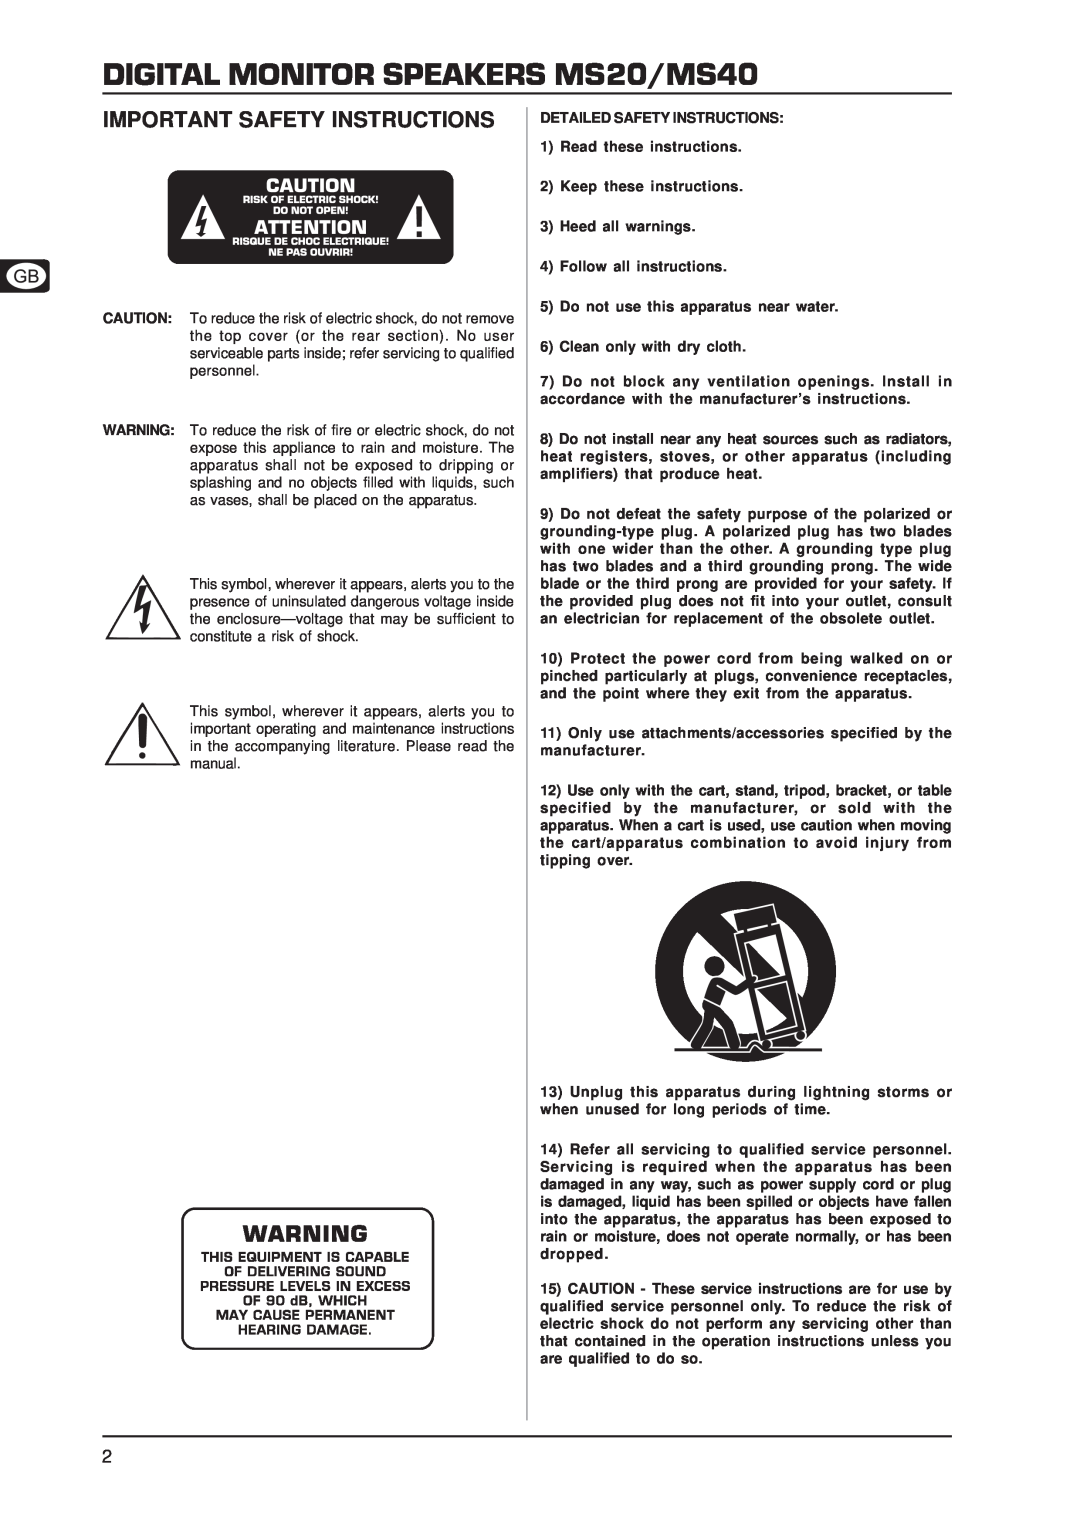 Behringer user manual DIGITAL MONITOR SPEAKERS MS20/MS40, Important Safety Instructions 